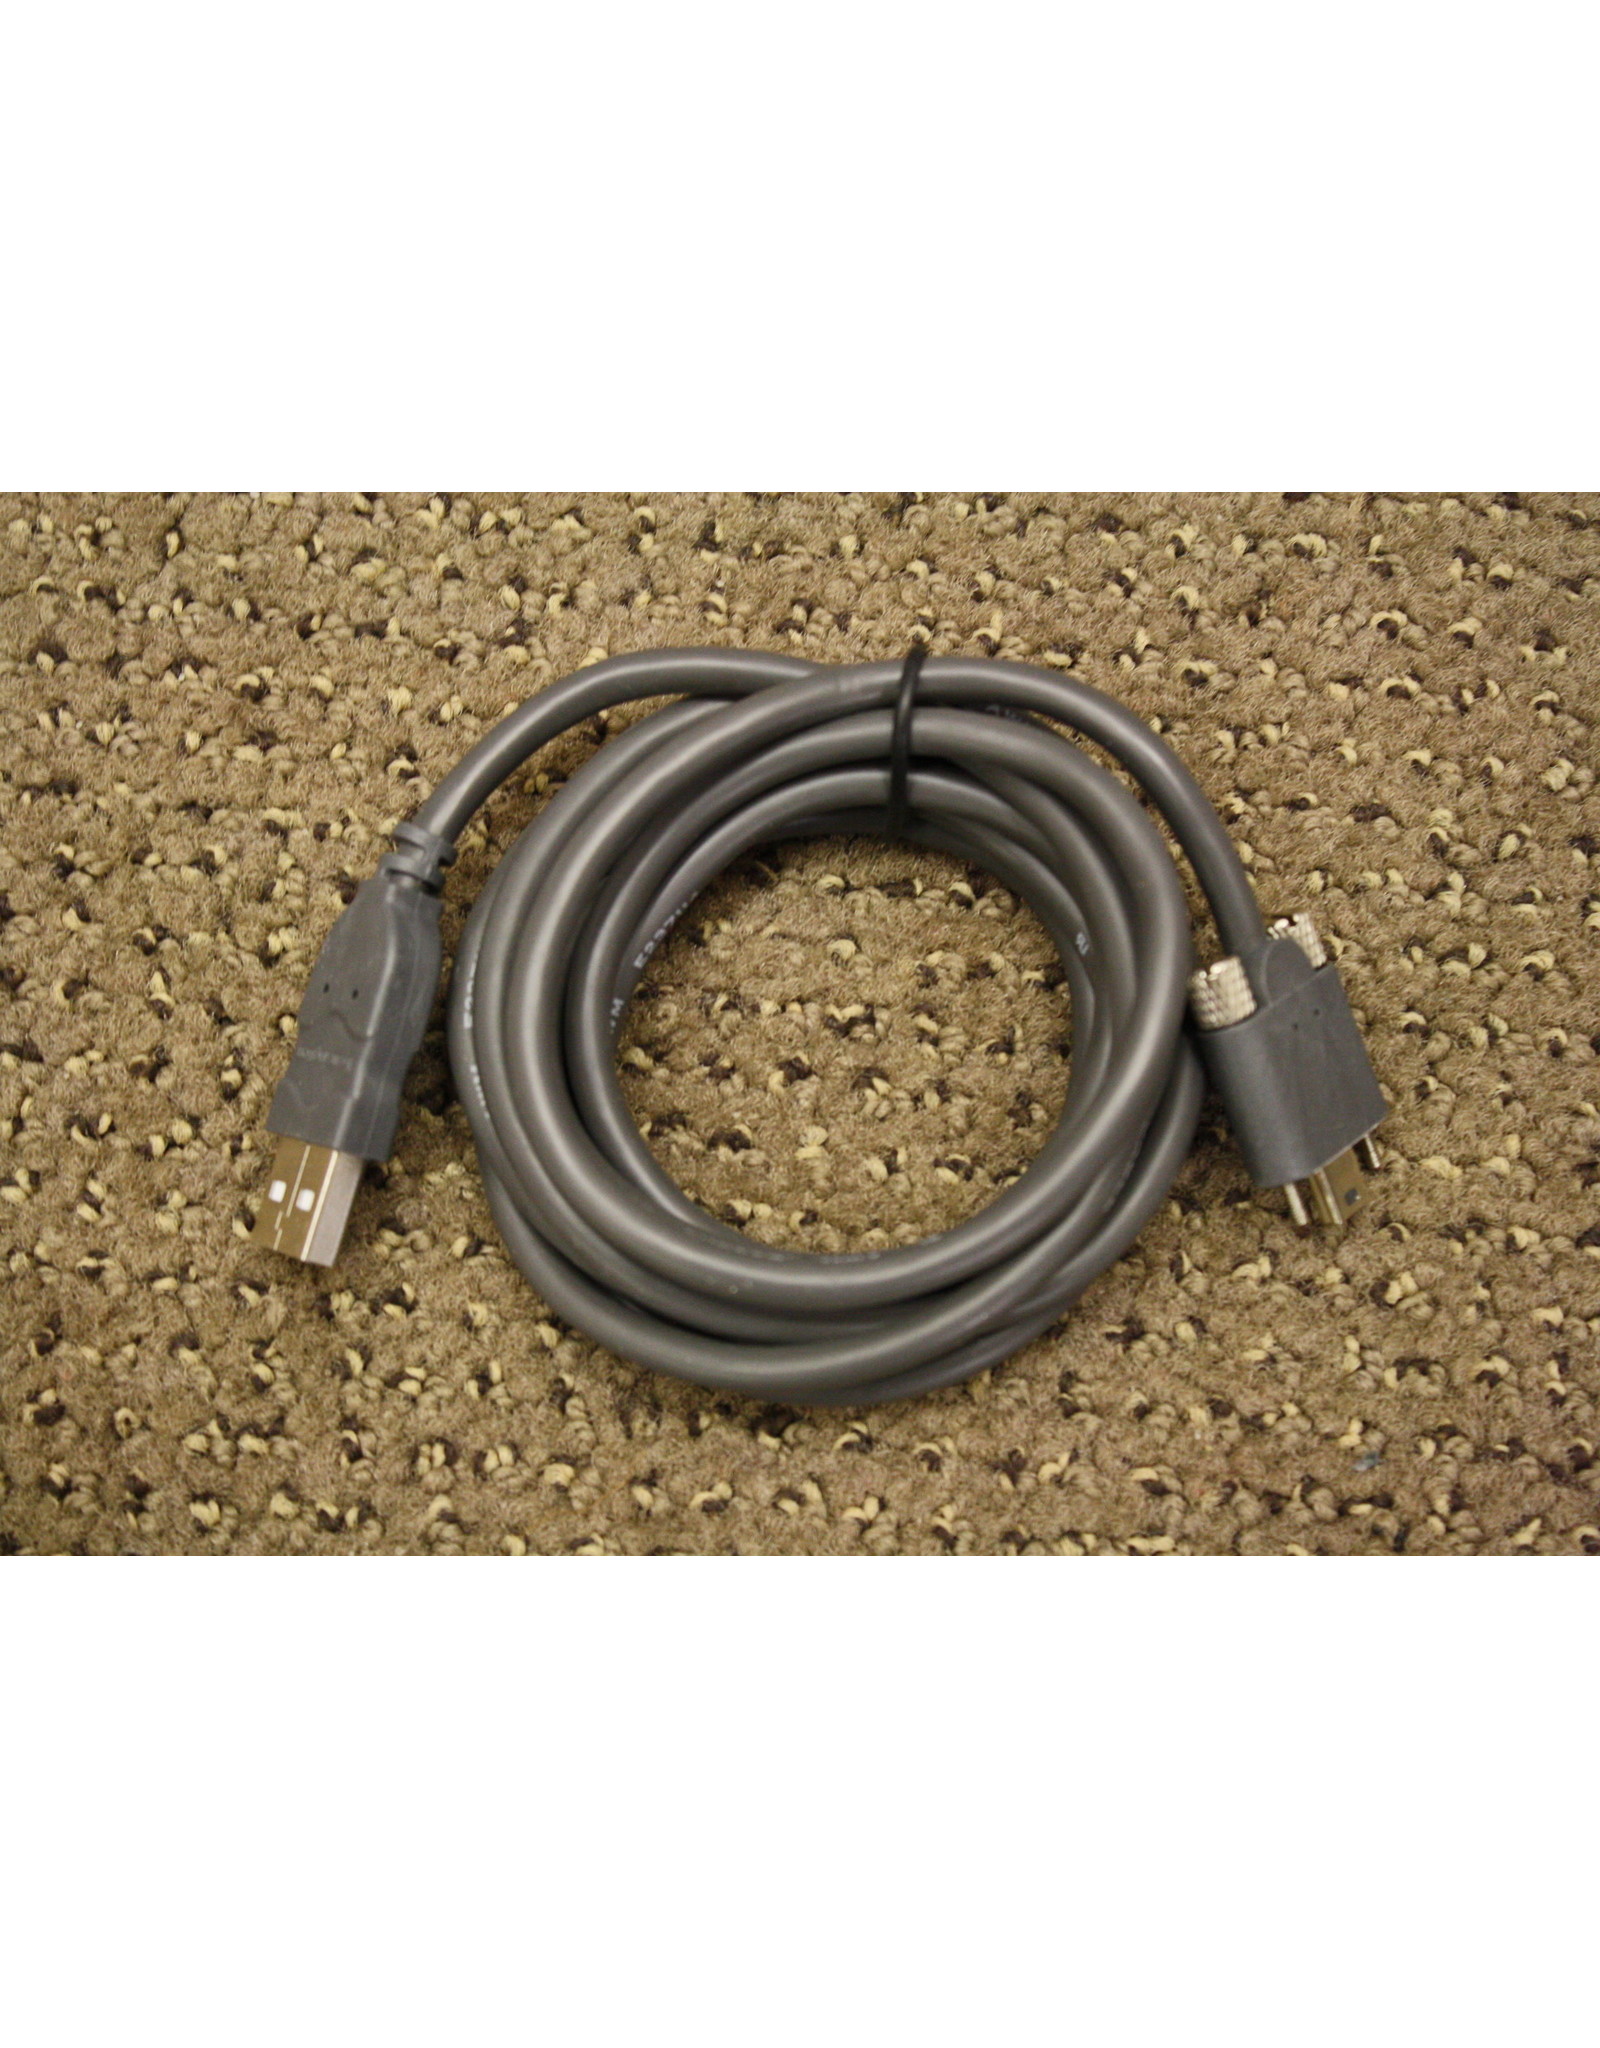 QHYCCD Polemaster Original USB Cable (Replacement)